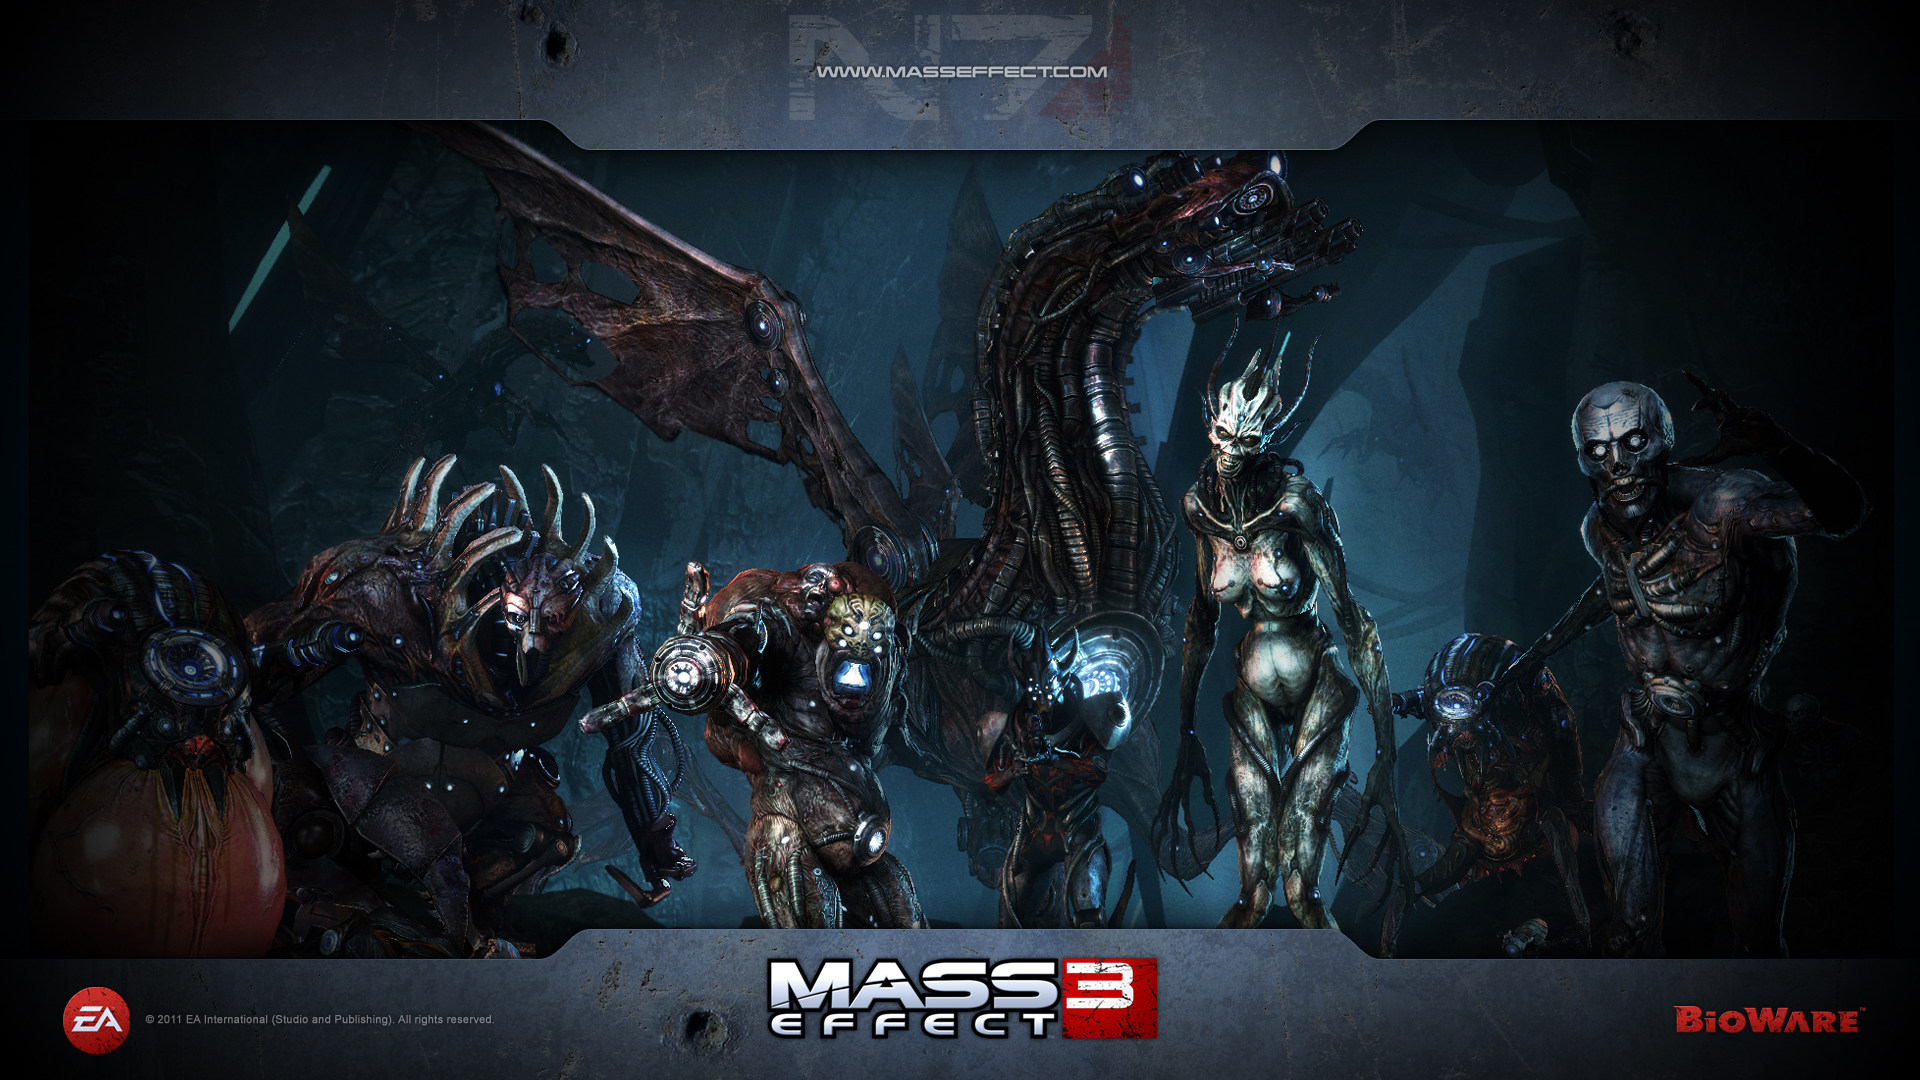 Mass Effect 3 screenshots, images and pictures - Giant Bomb